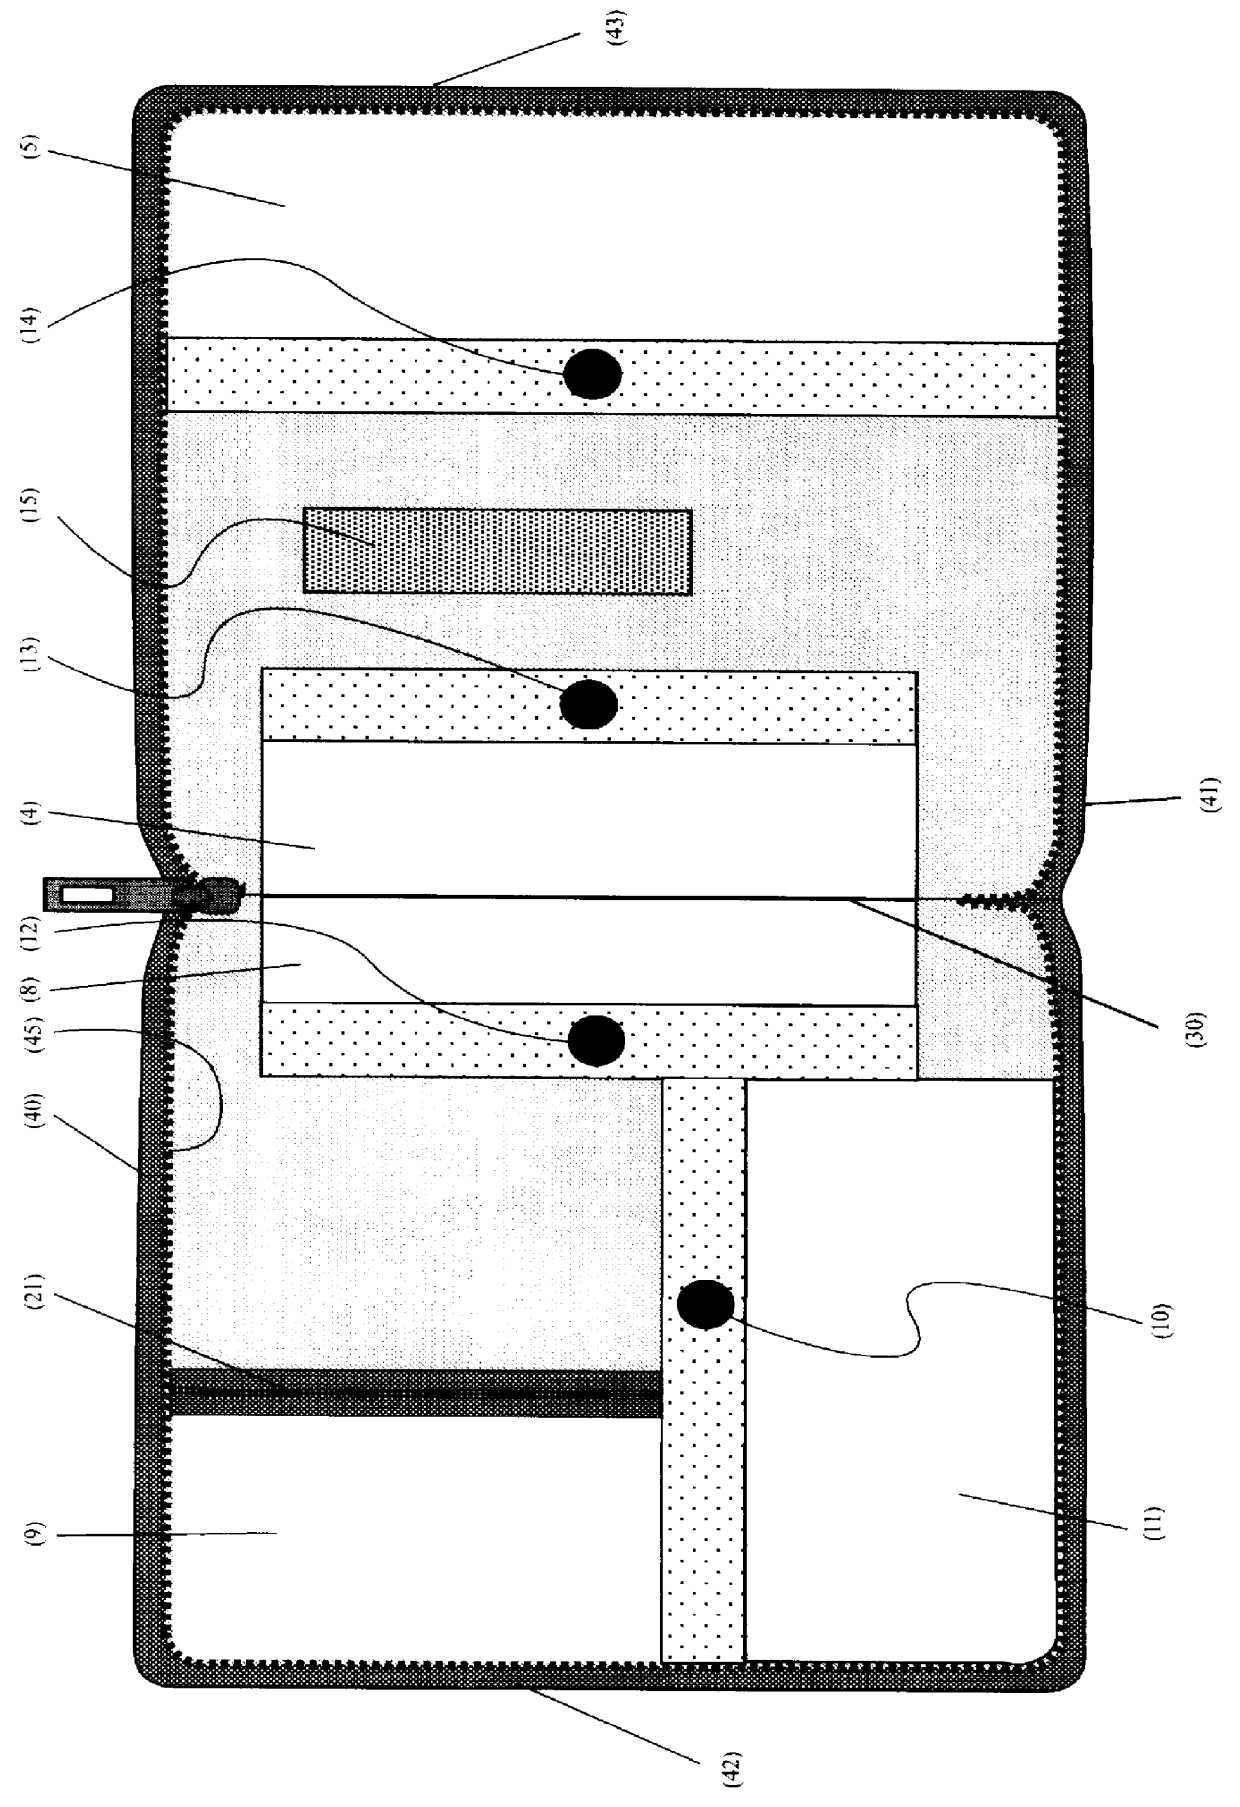 Computer cord storage and dispensing organizer and system